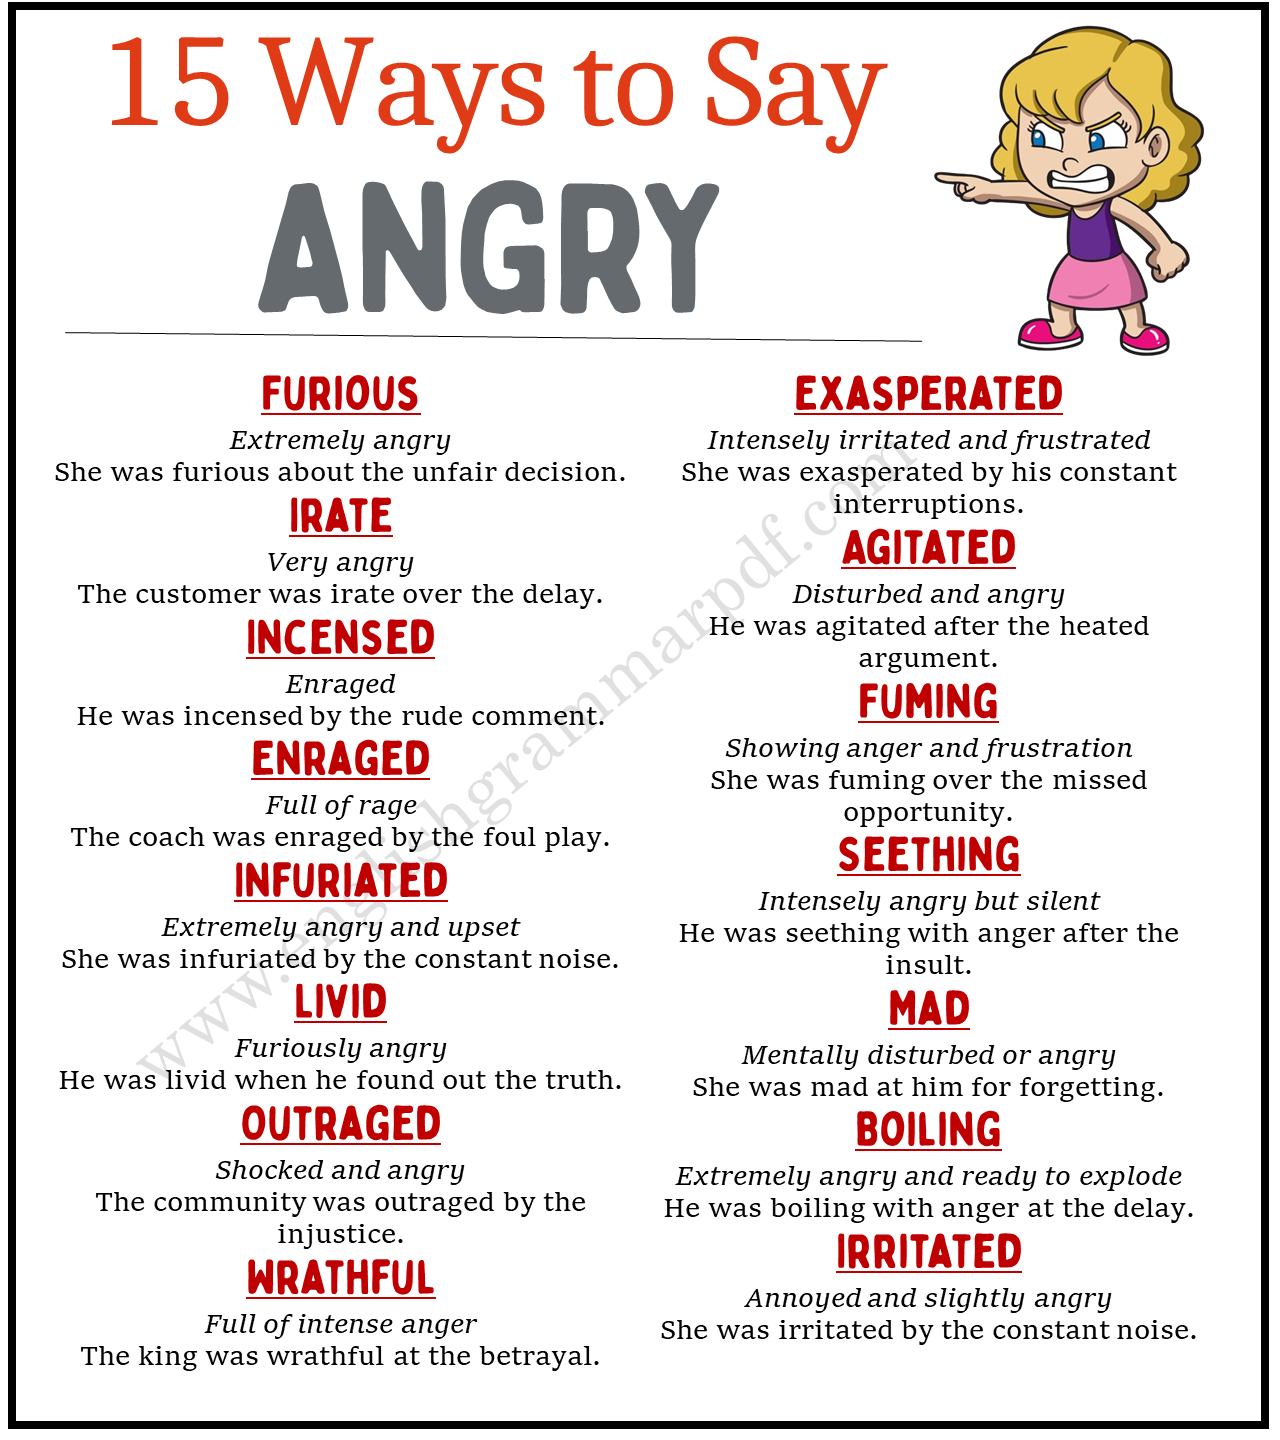 Ways to Say ‘Angry’